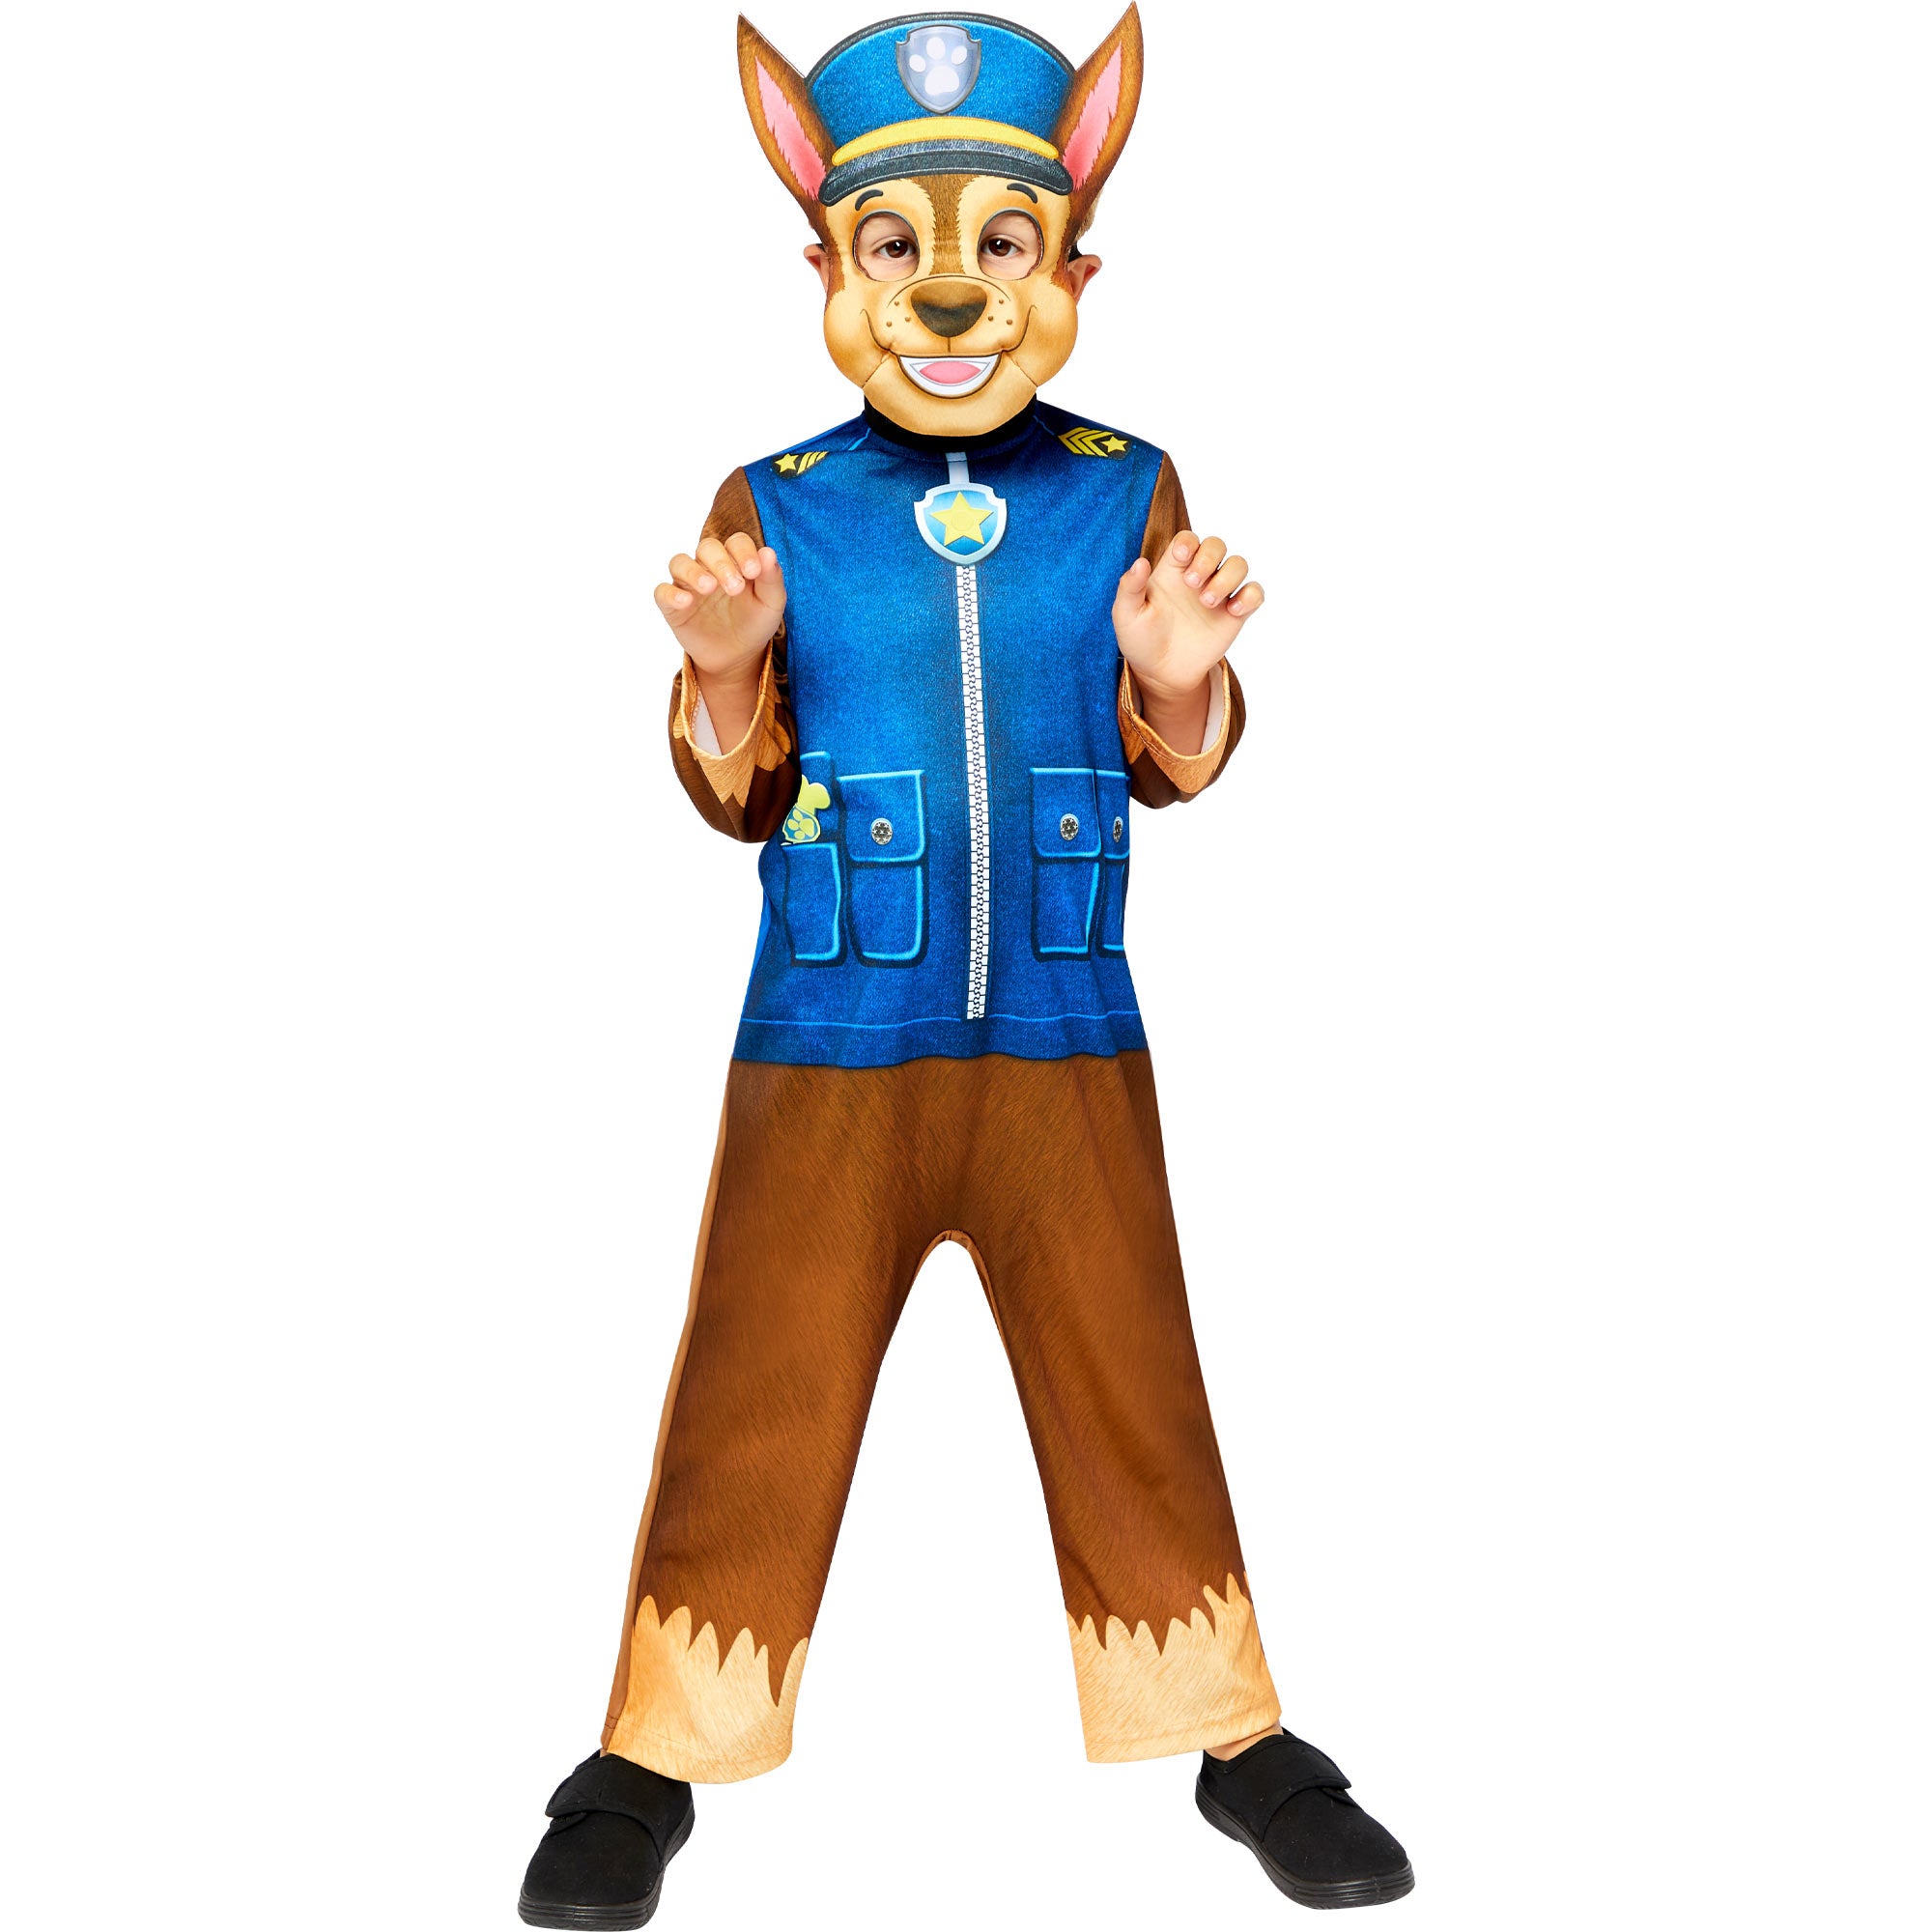 Costume Paw Patrol Chase 4-6 Years Jumpsuit & Hat